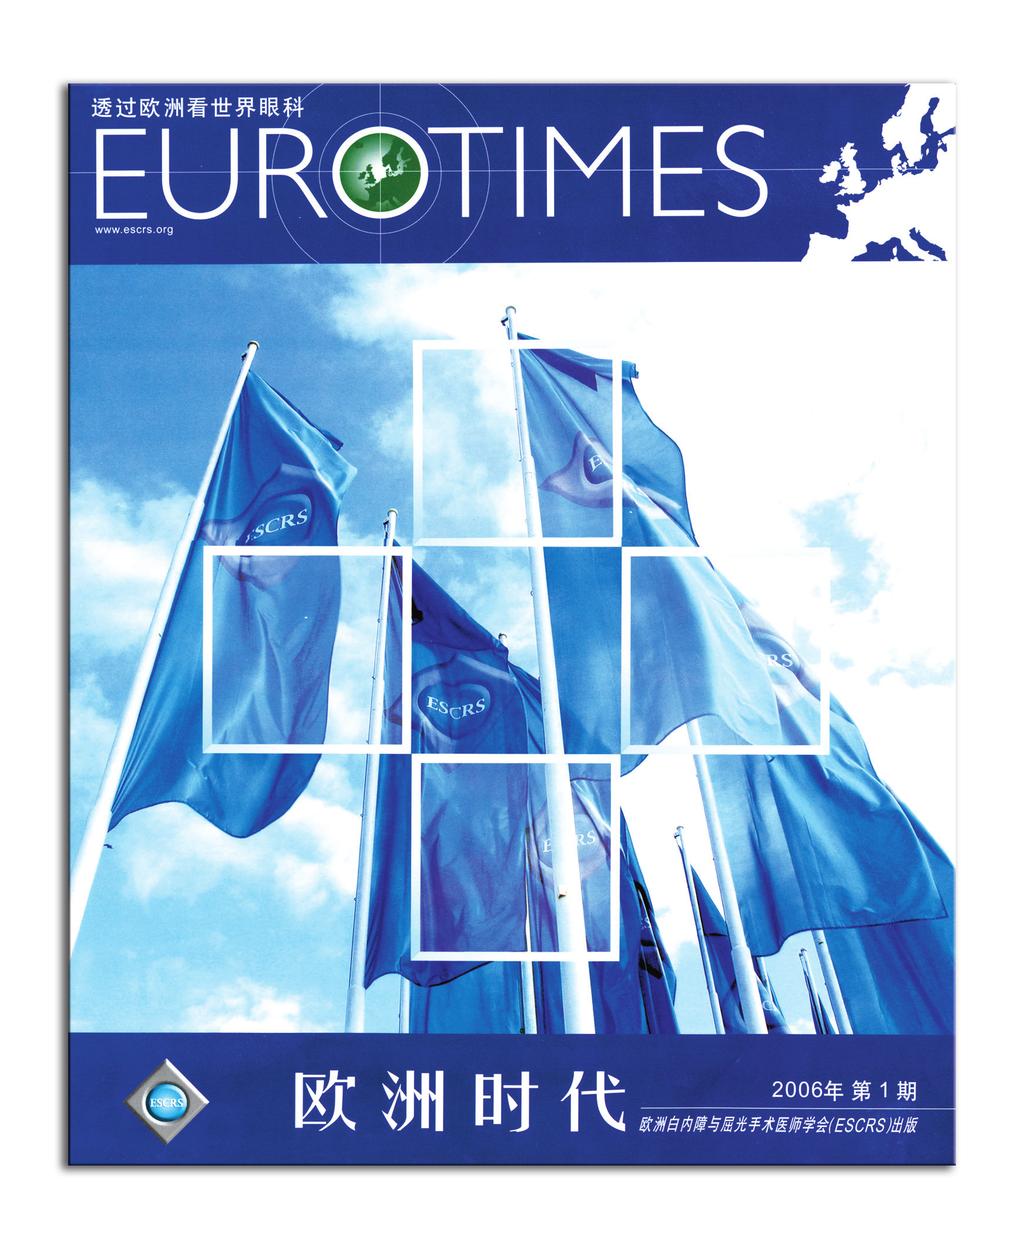 EuroTimes Regional Editions EuroTimes - Chinese Language Launched at the APAO in Singapore in June 2006, Chinese language EuroTimes will be published quarterly in 2007.